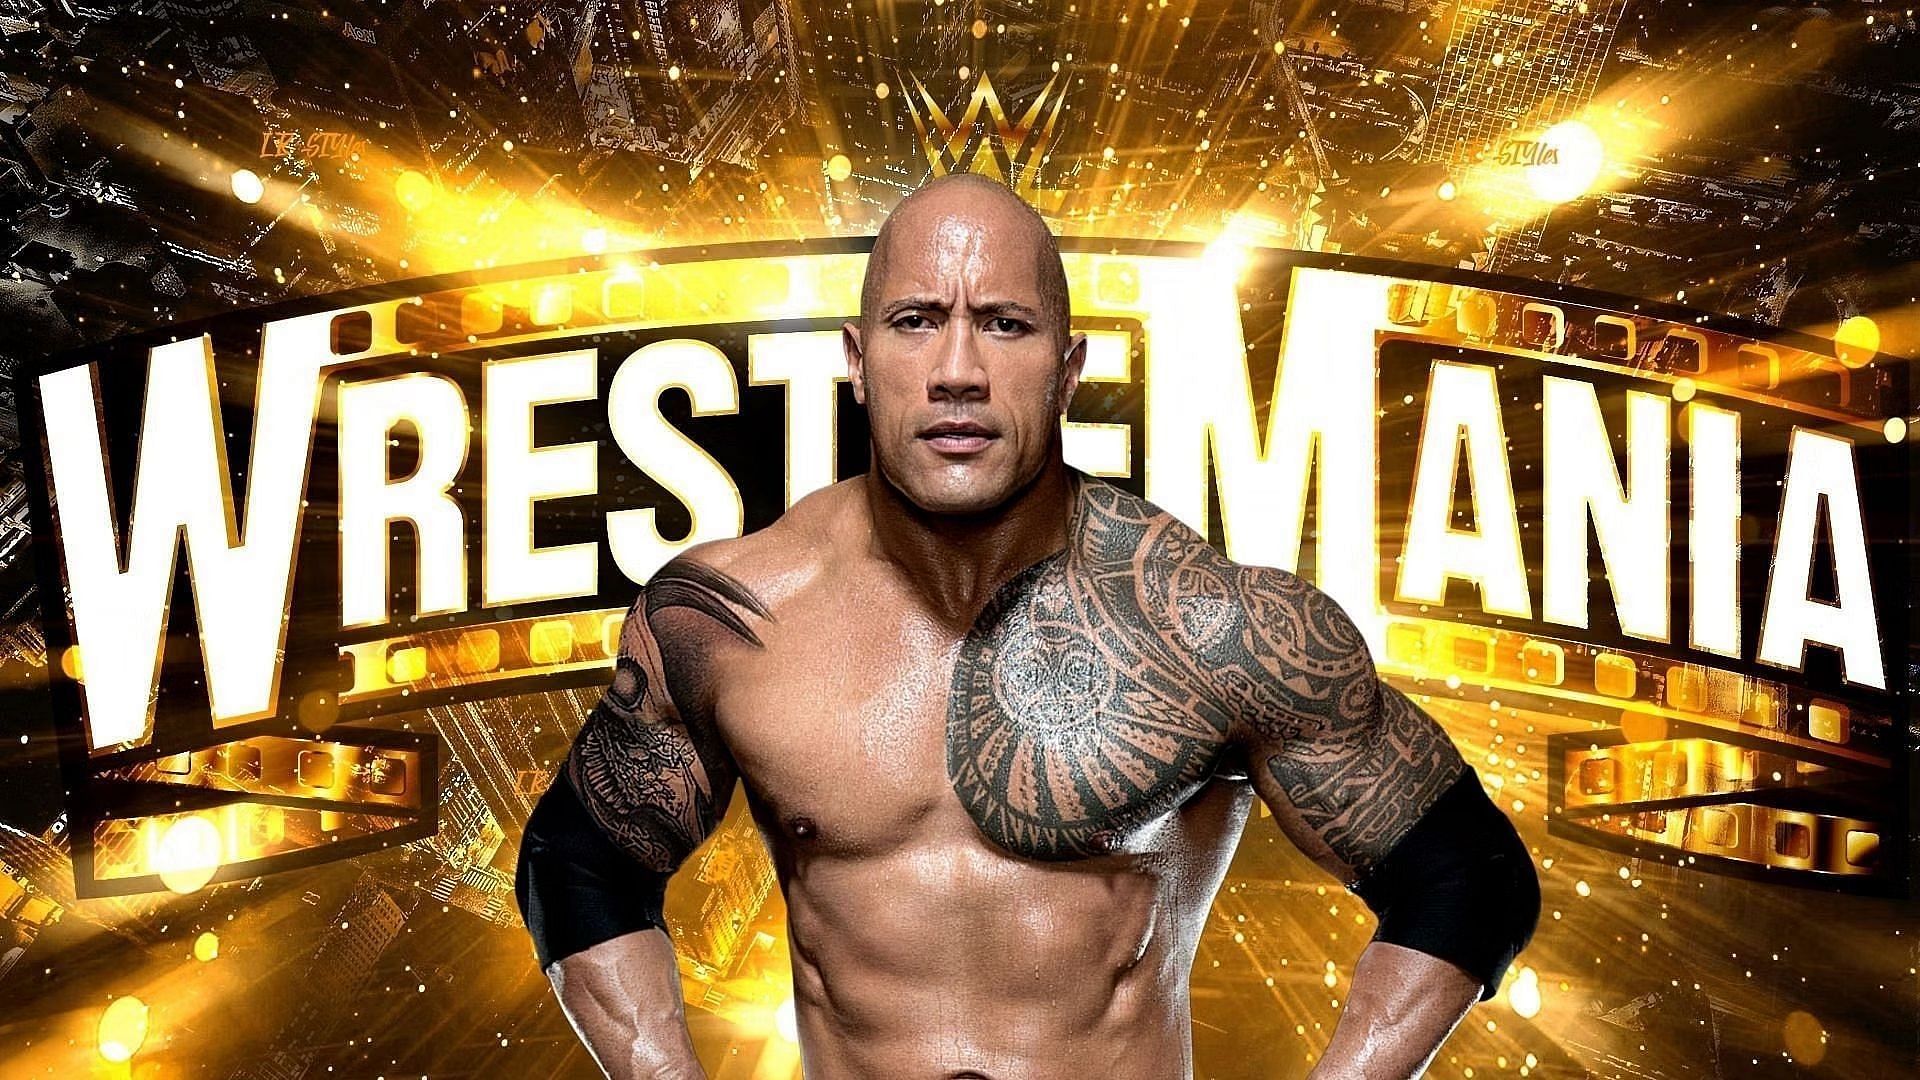 The Rock is one of WWE